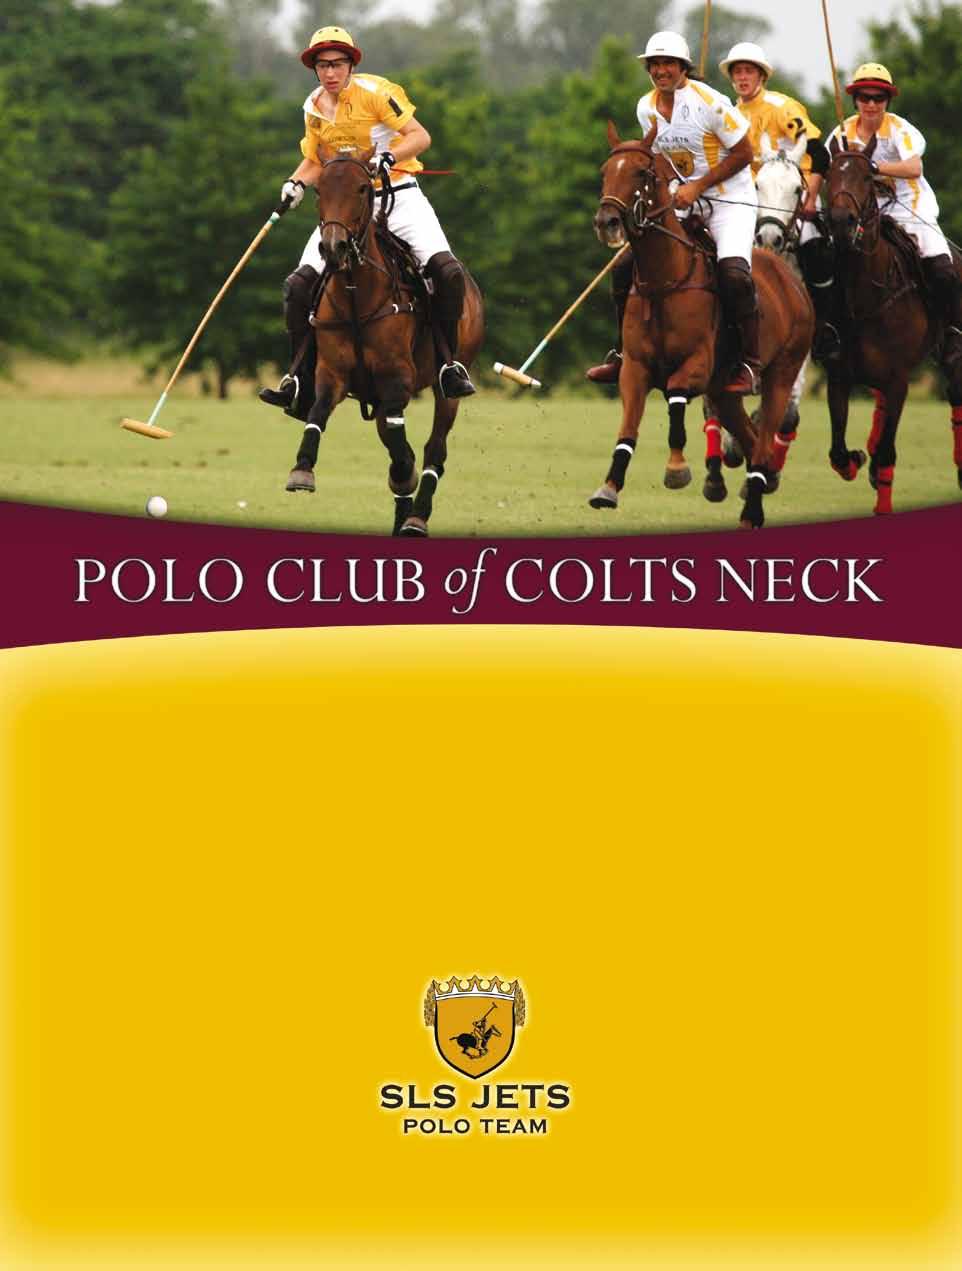 Experience the thrill of a live polo match, go onto the field to participate in the traditional divot stomping, walk about and socialize.